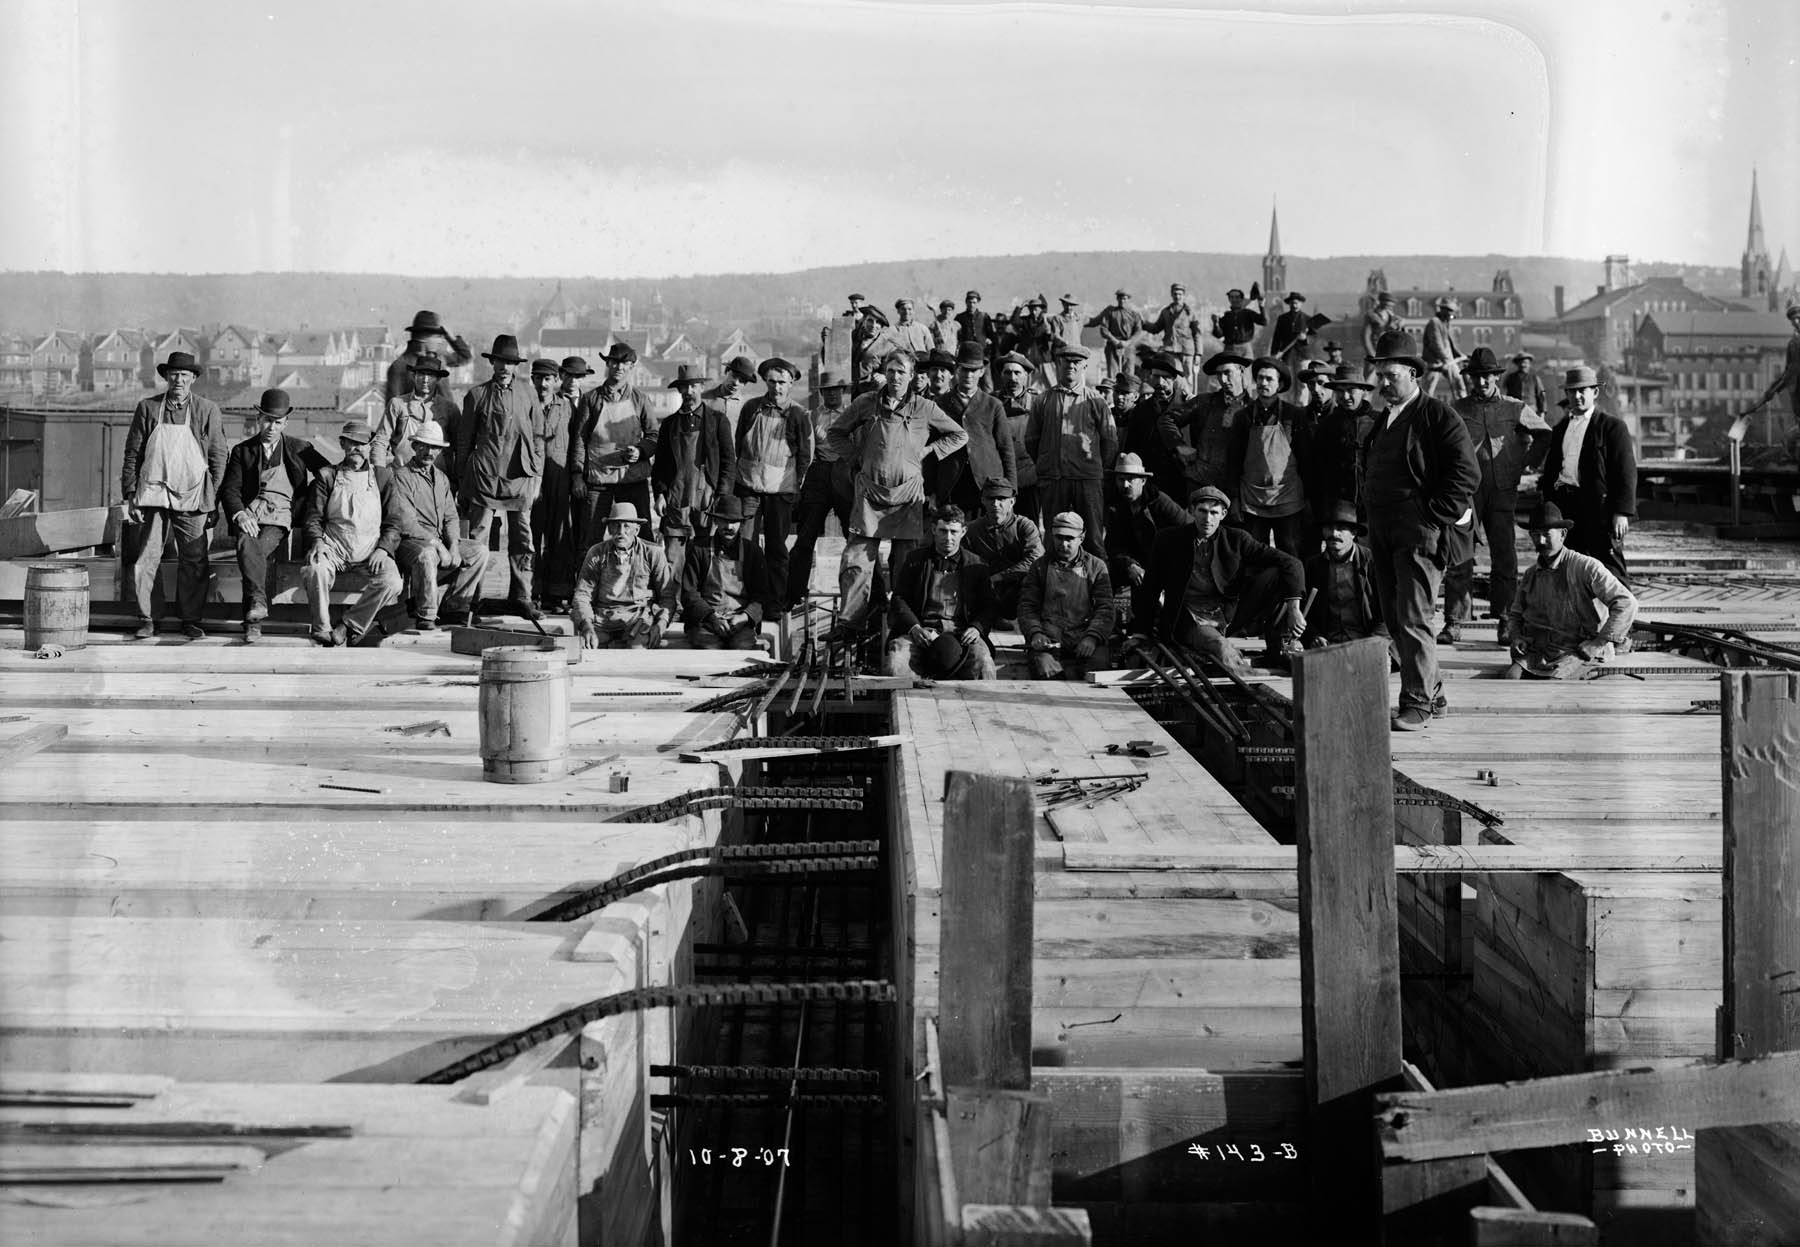 Construction workers at Delaware, Lackawanna, and Western Railroad locomotive shop